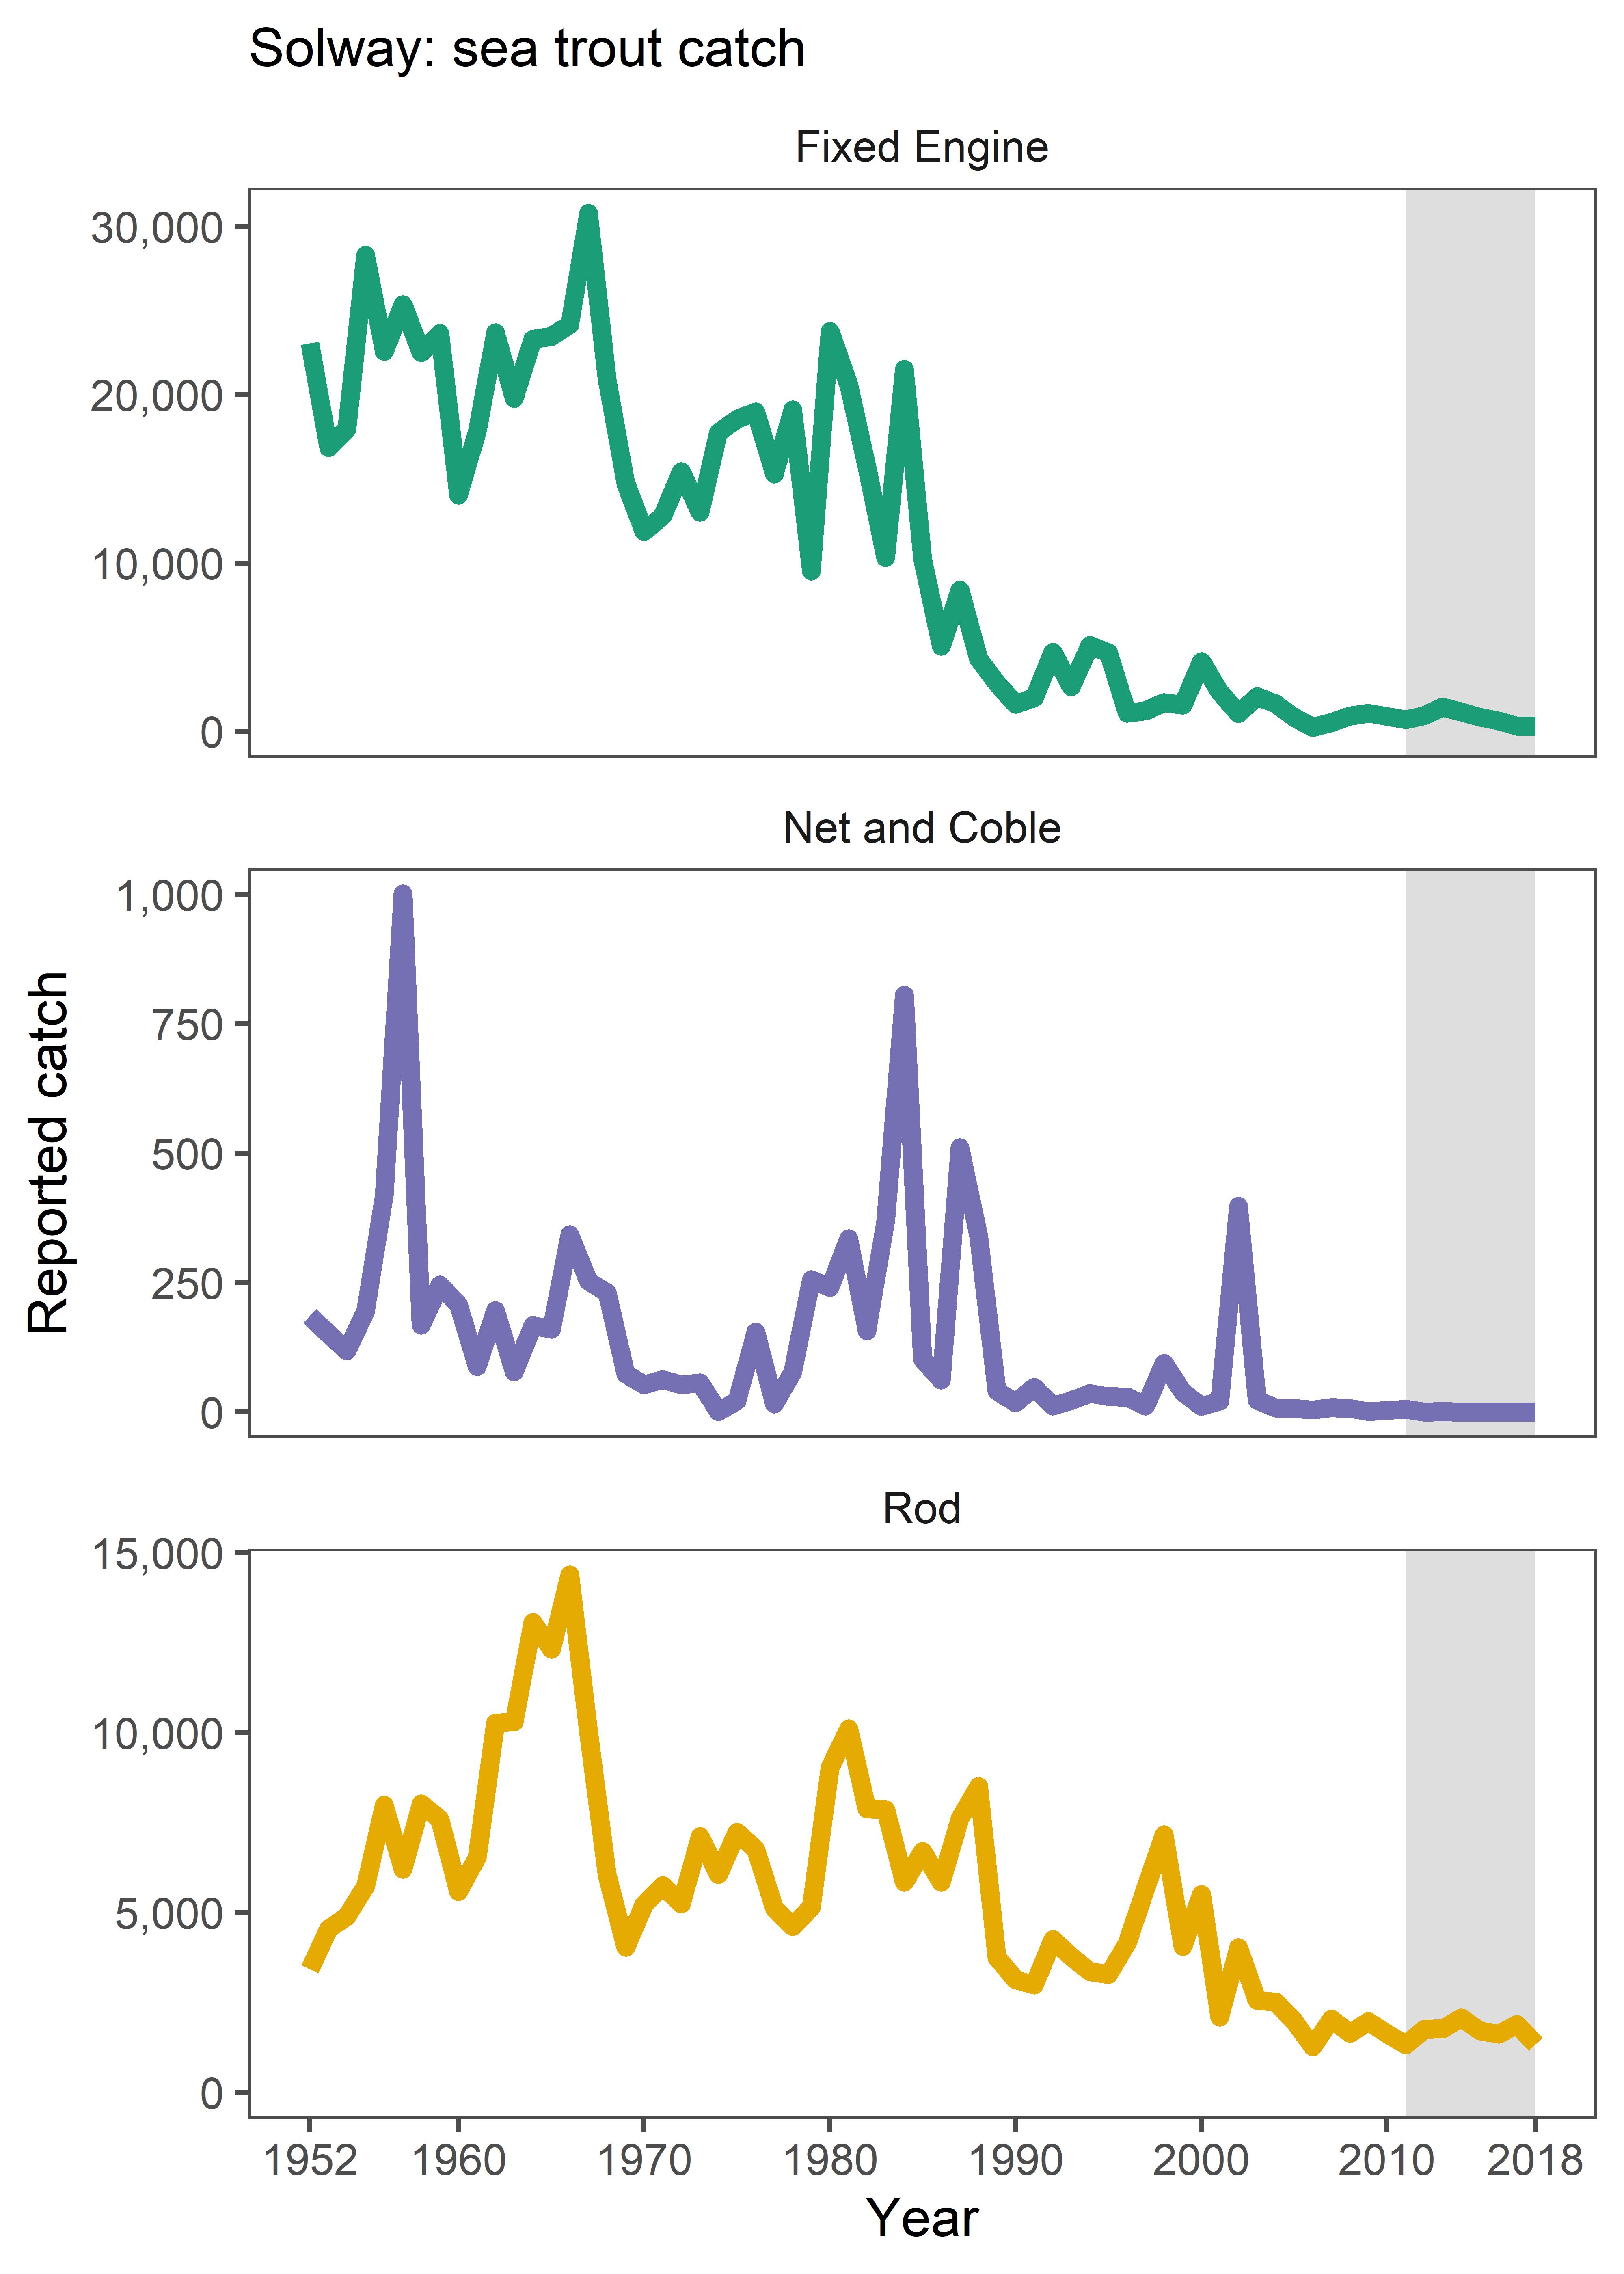 Figure s: Reported catches of sea trout from the fixed engine, net and coble and rod fisheries in the Solway SMR 1952 to 2018.